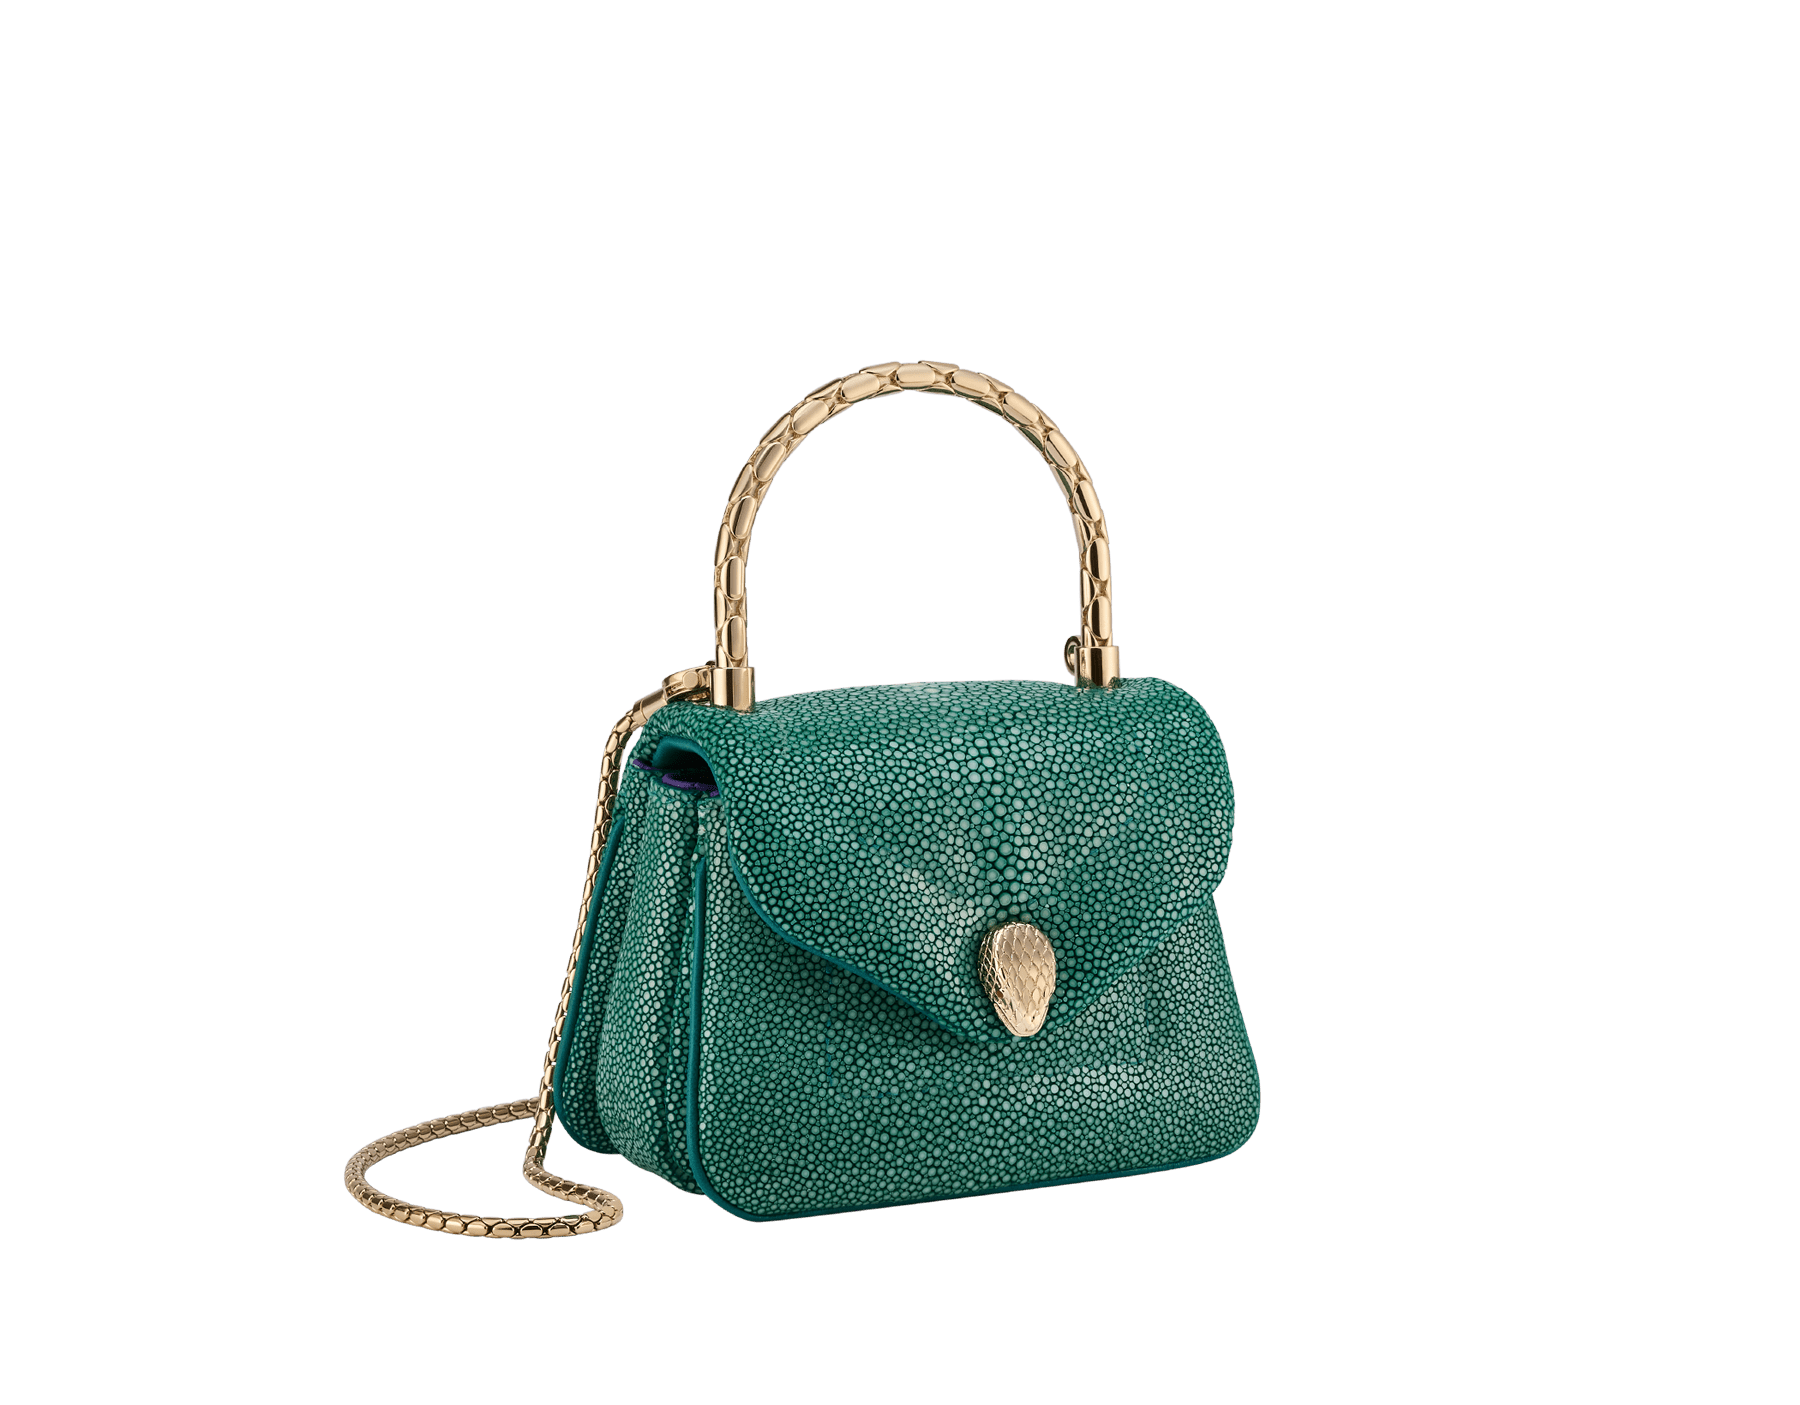 Serpenti Reverse micro top handle bag in soft emerald green galuchat skin with black nappa leather lining. Captivating magnetic snakehead closure in light gold-plated brass embellished with red enamel eyes. SRV-NANOREVERSE image 1